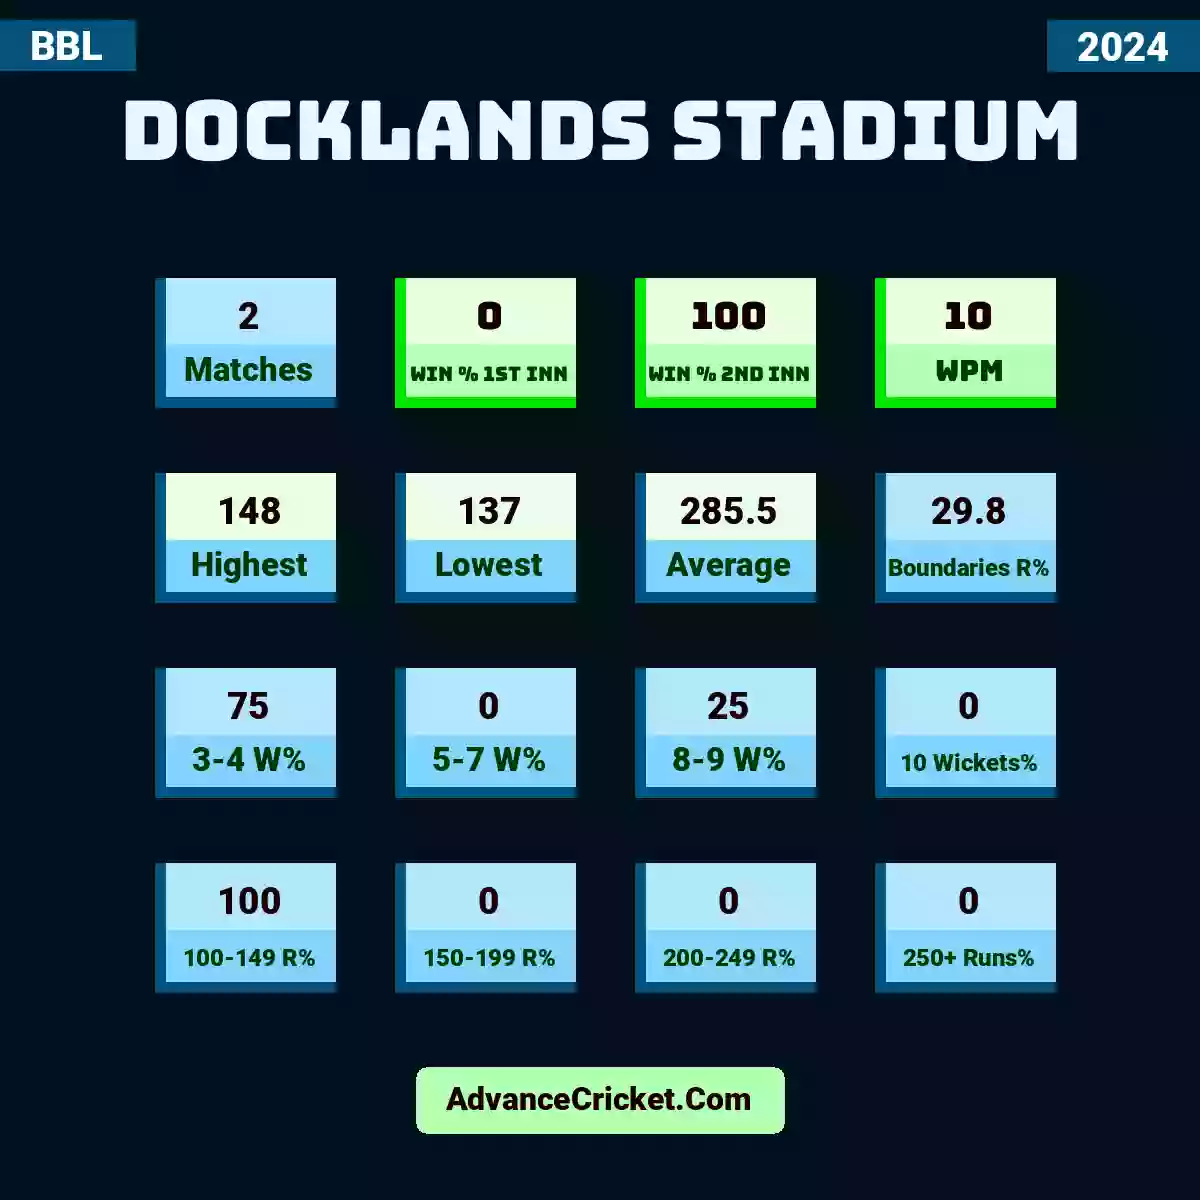 Image showing Docklands Stadium with Matches: 2, Win % 1st Inn: 0, Win % 2nd Inn: 100, WPM: 10, Highest: 148, Lowest: 137, Average: 285.5, Boundaries R%: 29.8, 3-4 W%: 75, 5-7 W%: 0, 8-9 W%: 25, 10 Wickets%: 0, 100-149 R%: 100, 150-199 R%: 0, 200-249 R%: 0, 250+ Runs%: 0.